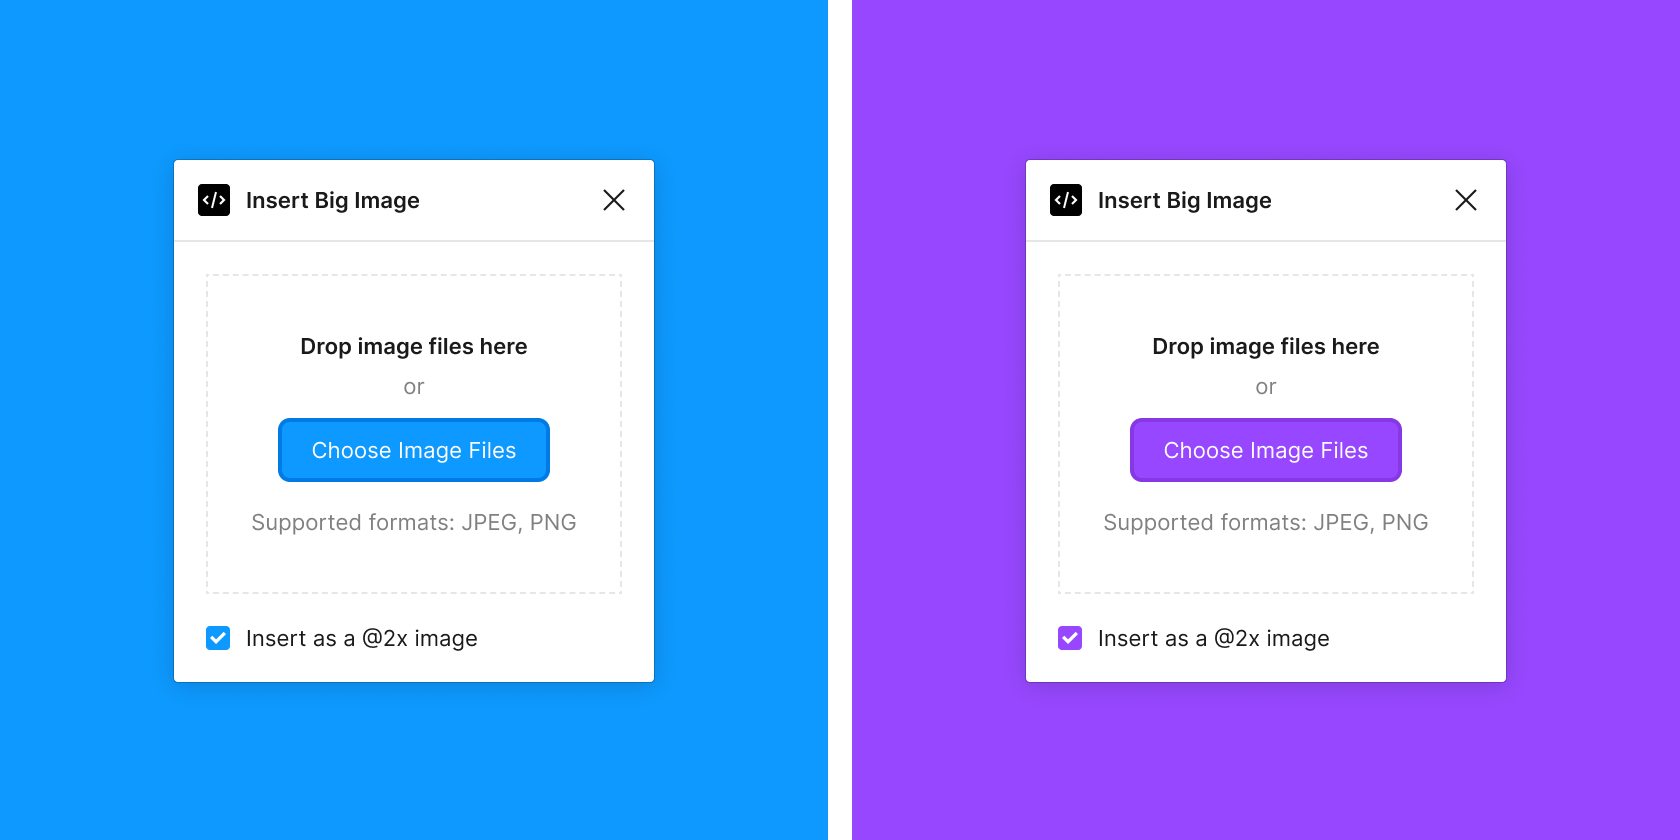 UI of the Insert Big Image plugin rendered using the Figma and FigJam themes